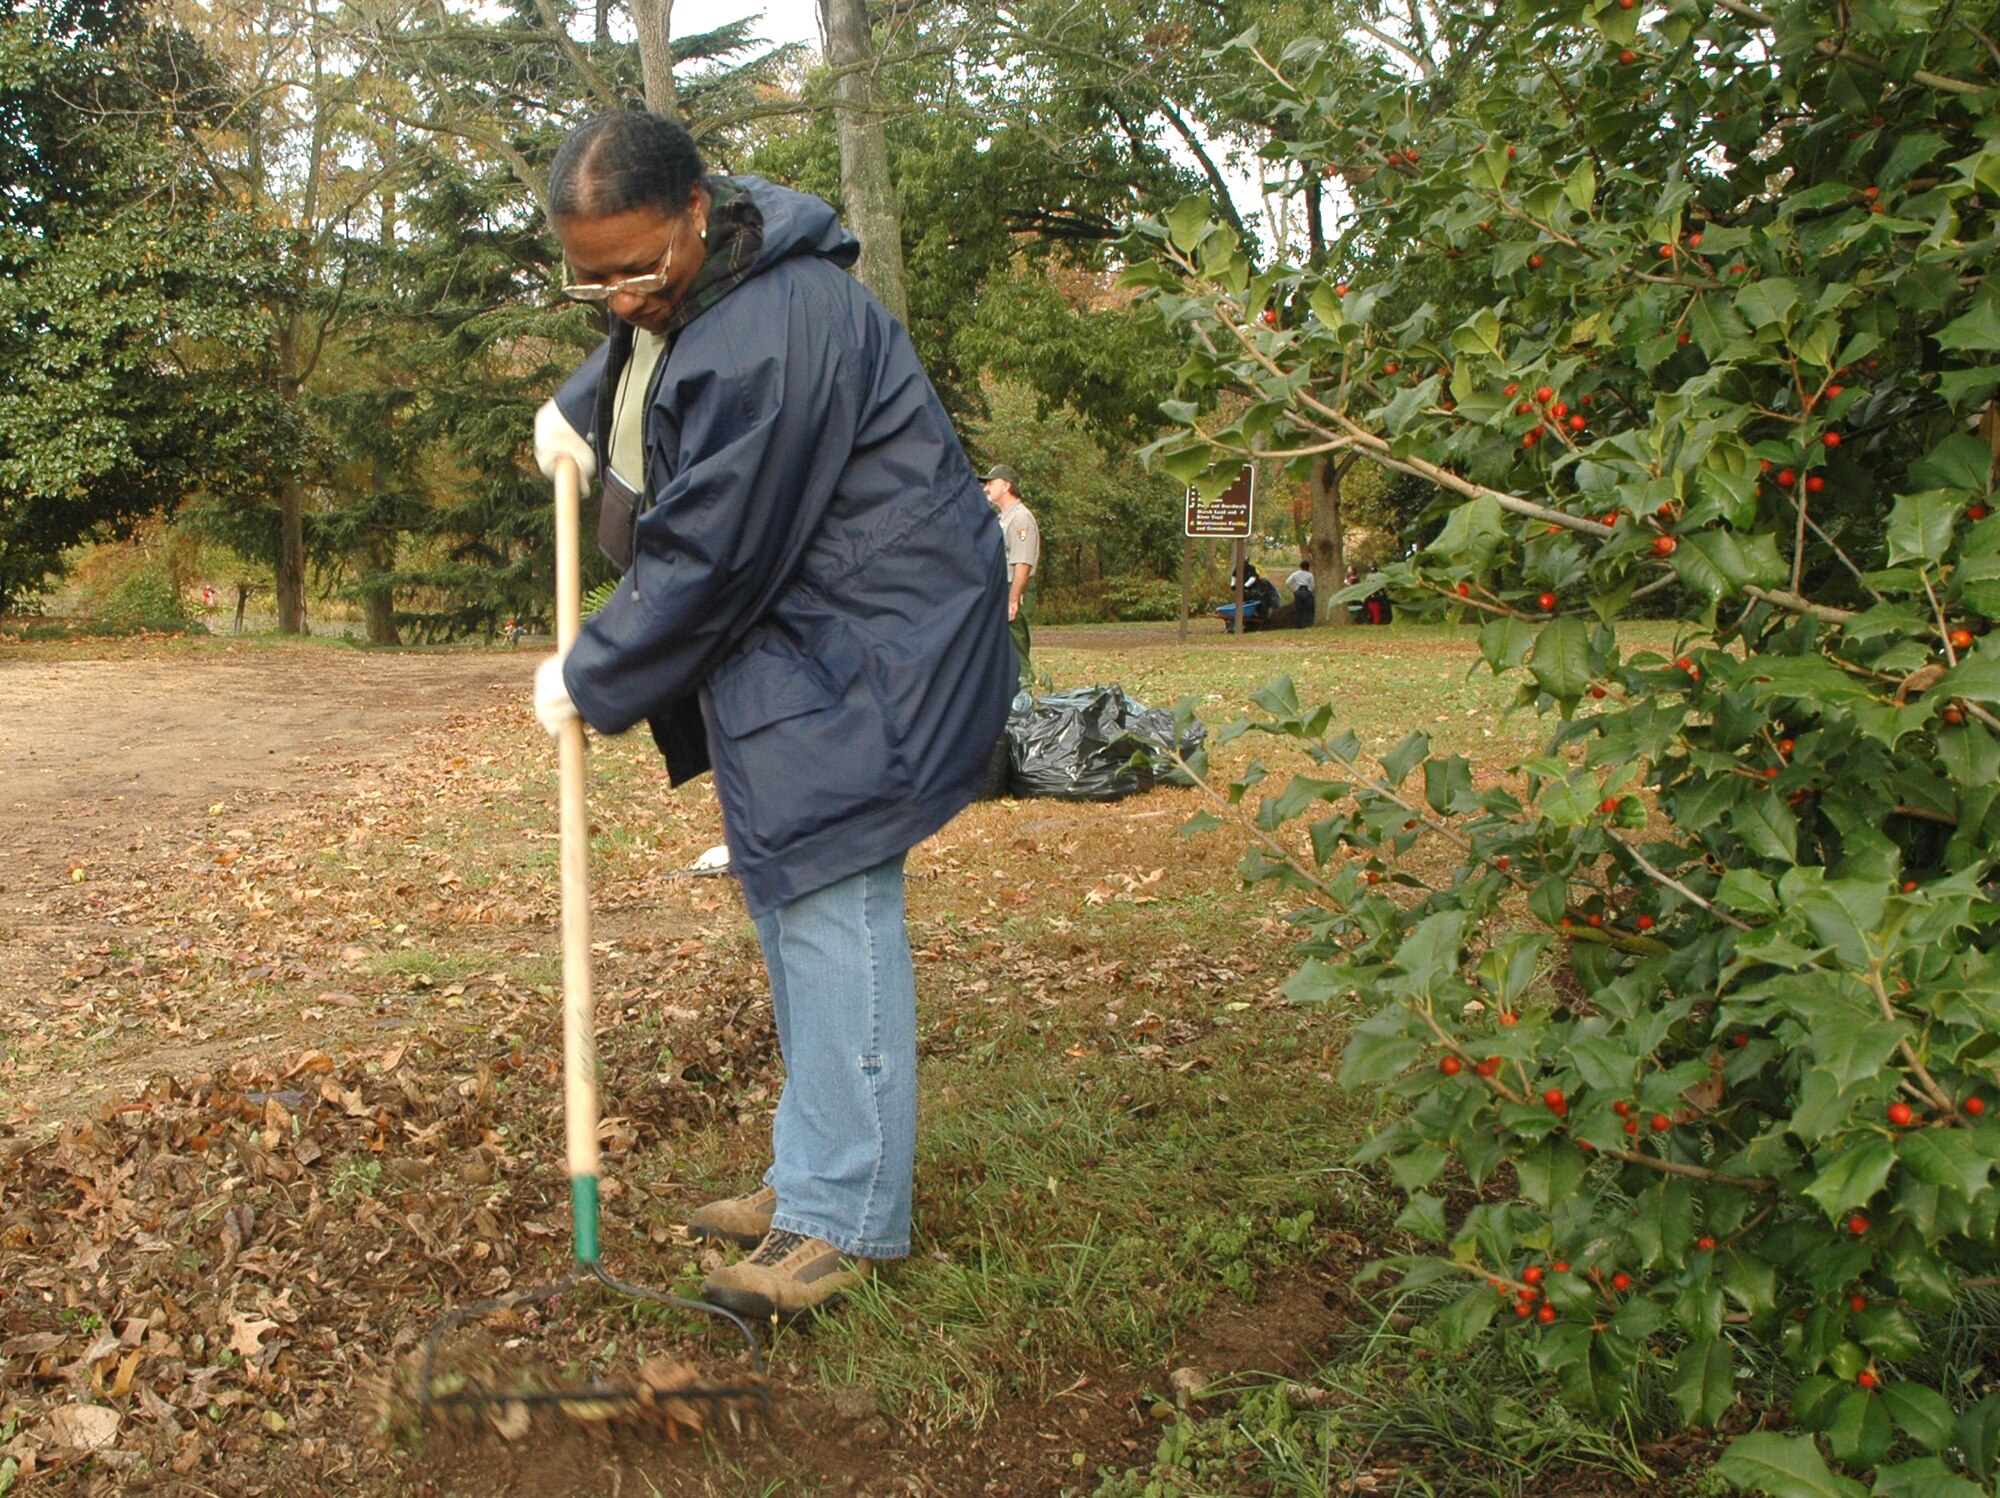 Mary S. Lee rakes leaves Oct. 25 at Kenilworth Aquatic Garden in Washington, D.C. Ms. Lee and her husband, Michael V. Lee, Air Force District of Washington, volunteered at the garden with Airmen, Sailors and Soldiers from the National Capital Region as part of a joint service project for national "Make a Difference Day." (U.S. Air Force photo/R. Michael Longoria)